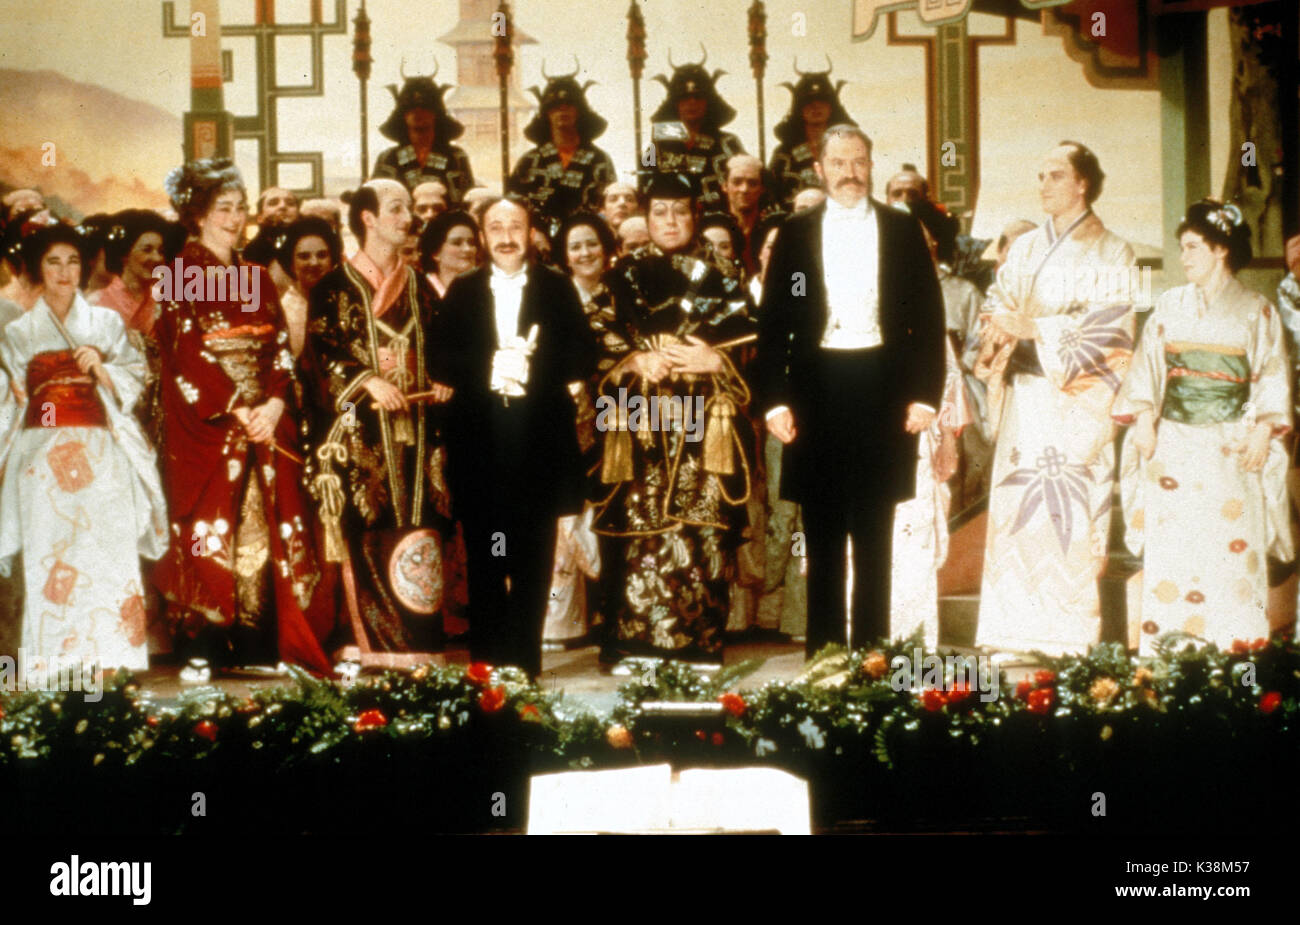 TOPSY TURVY MARTIN SAVAGE comme GEORGE GROSSMITH ALLAN CORDUNER comme sir Arthur Sullivan, Timothy SPALL comme RICHARD TEMPLE, Jim Broadbent comme W S GILBERT, Kevin McKIDD que DURWARD LELY, SHIRLEY HENDERSON comme LEONARA BRAHAN Date : 1999 Banque D'Images